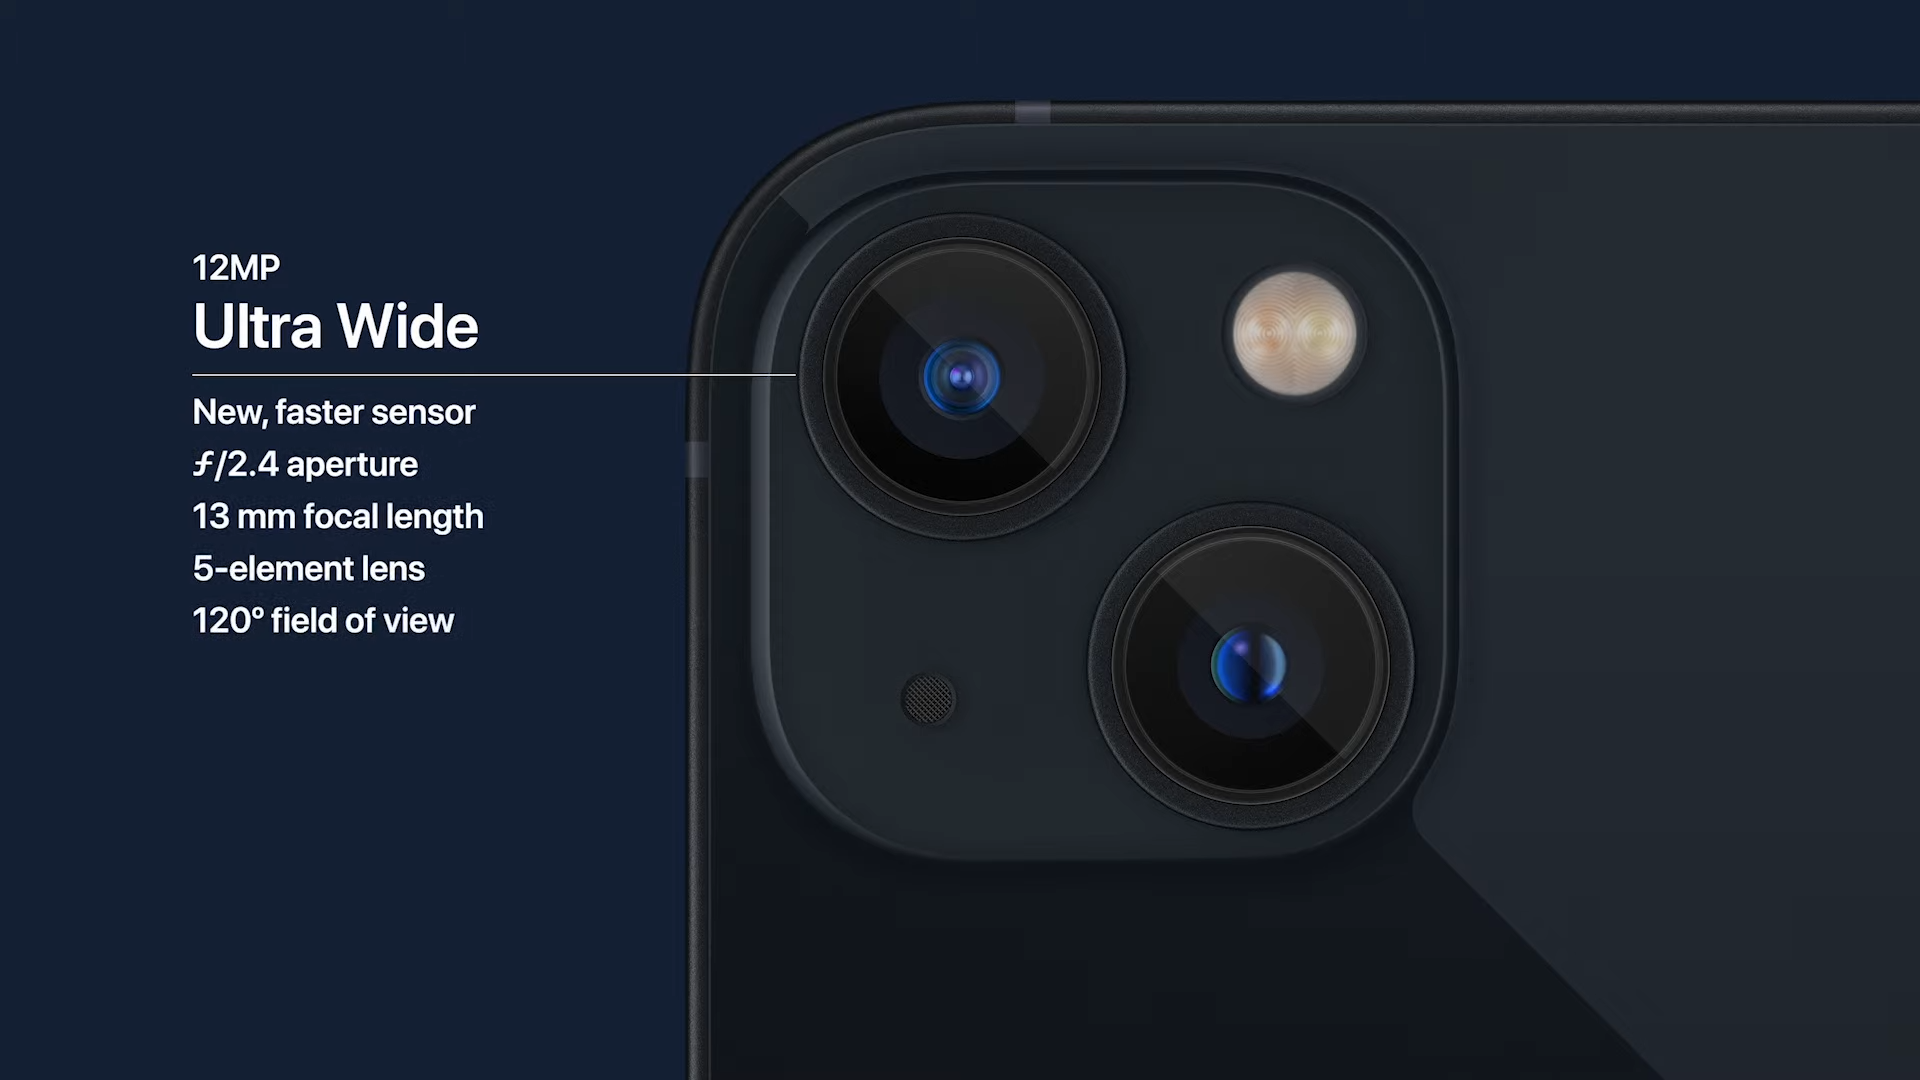 New iPhone 13 ultrawide camera - Apple goes big with the iPhone 13: bigger camera, battery, storage, same price